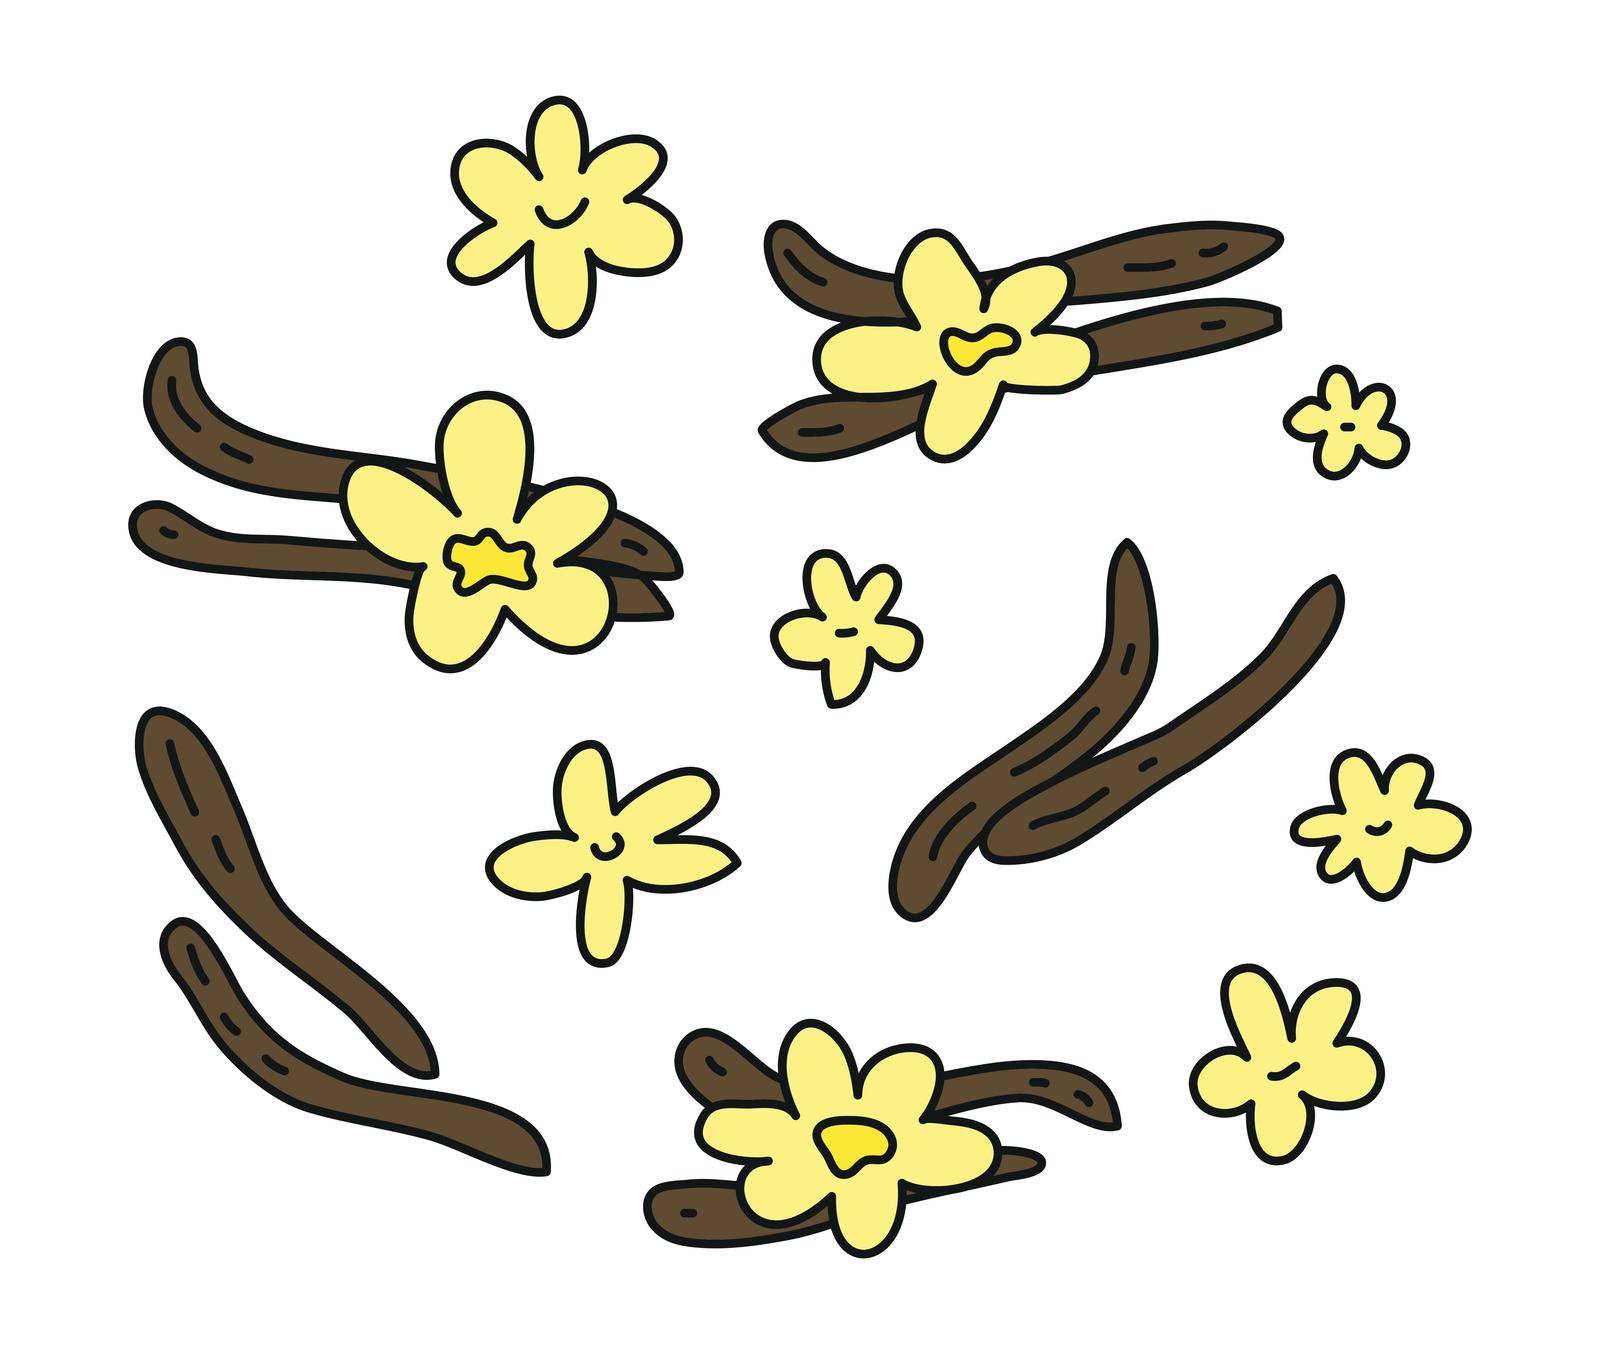 Set of doodle vanilla sticks and flowers. by Minur